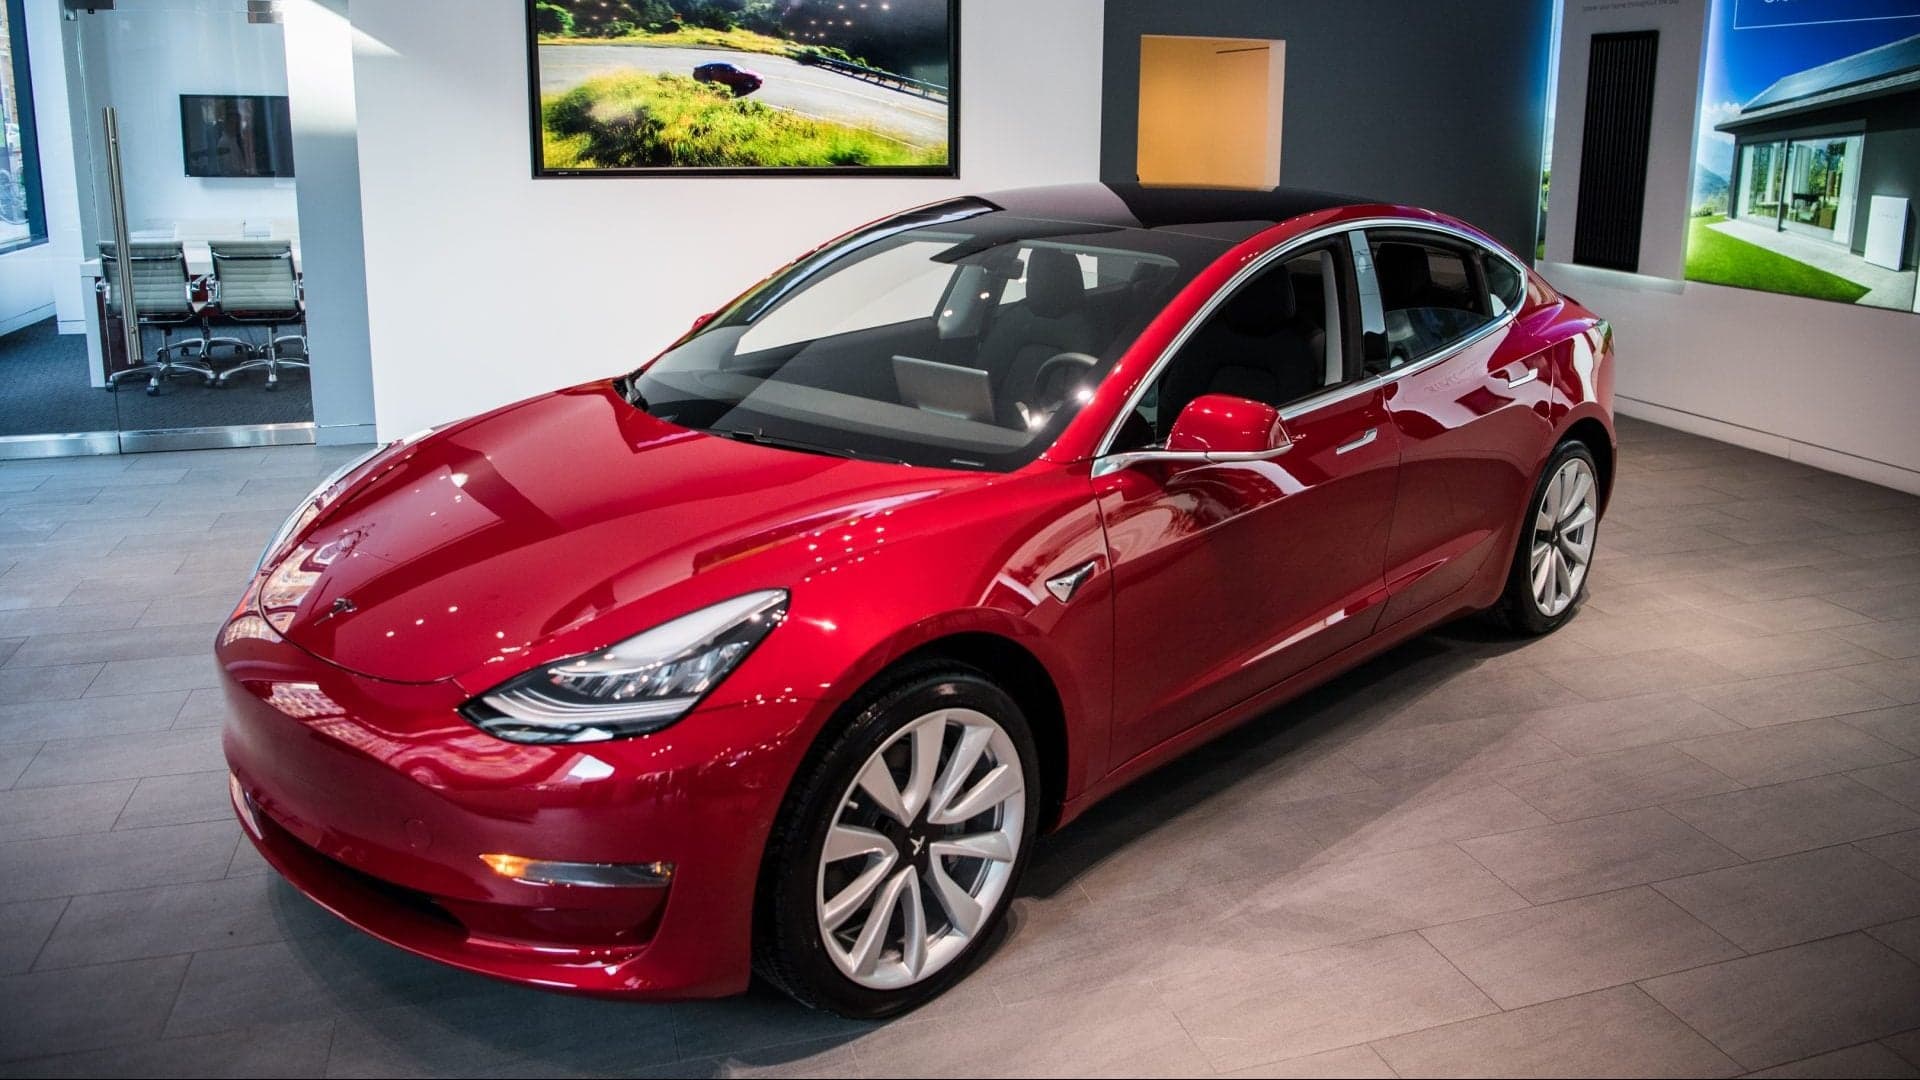 Tesla Just Barely Achieved Its Model 3 Production Goal in Q2